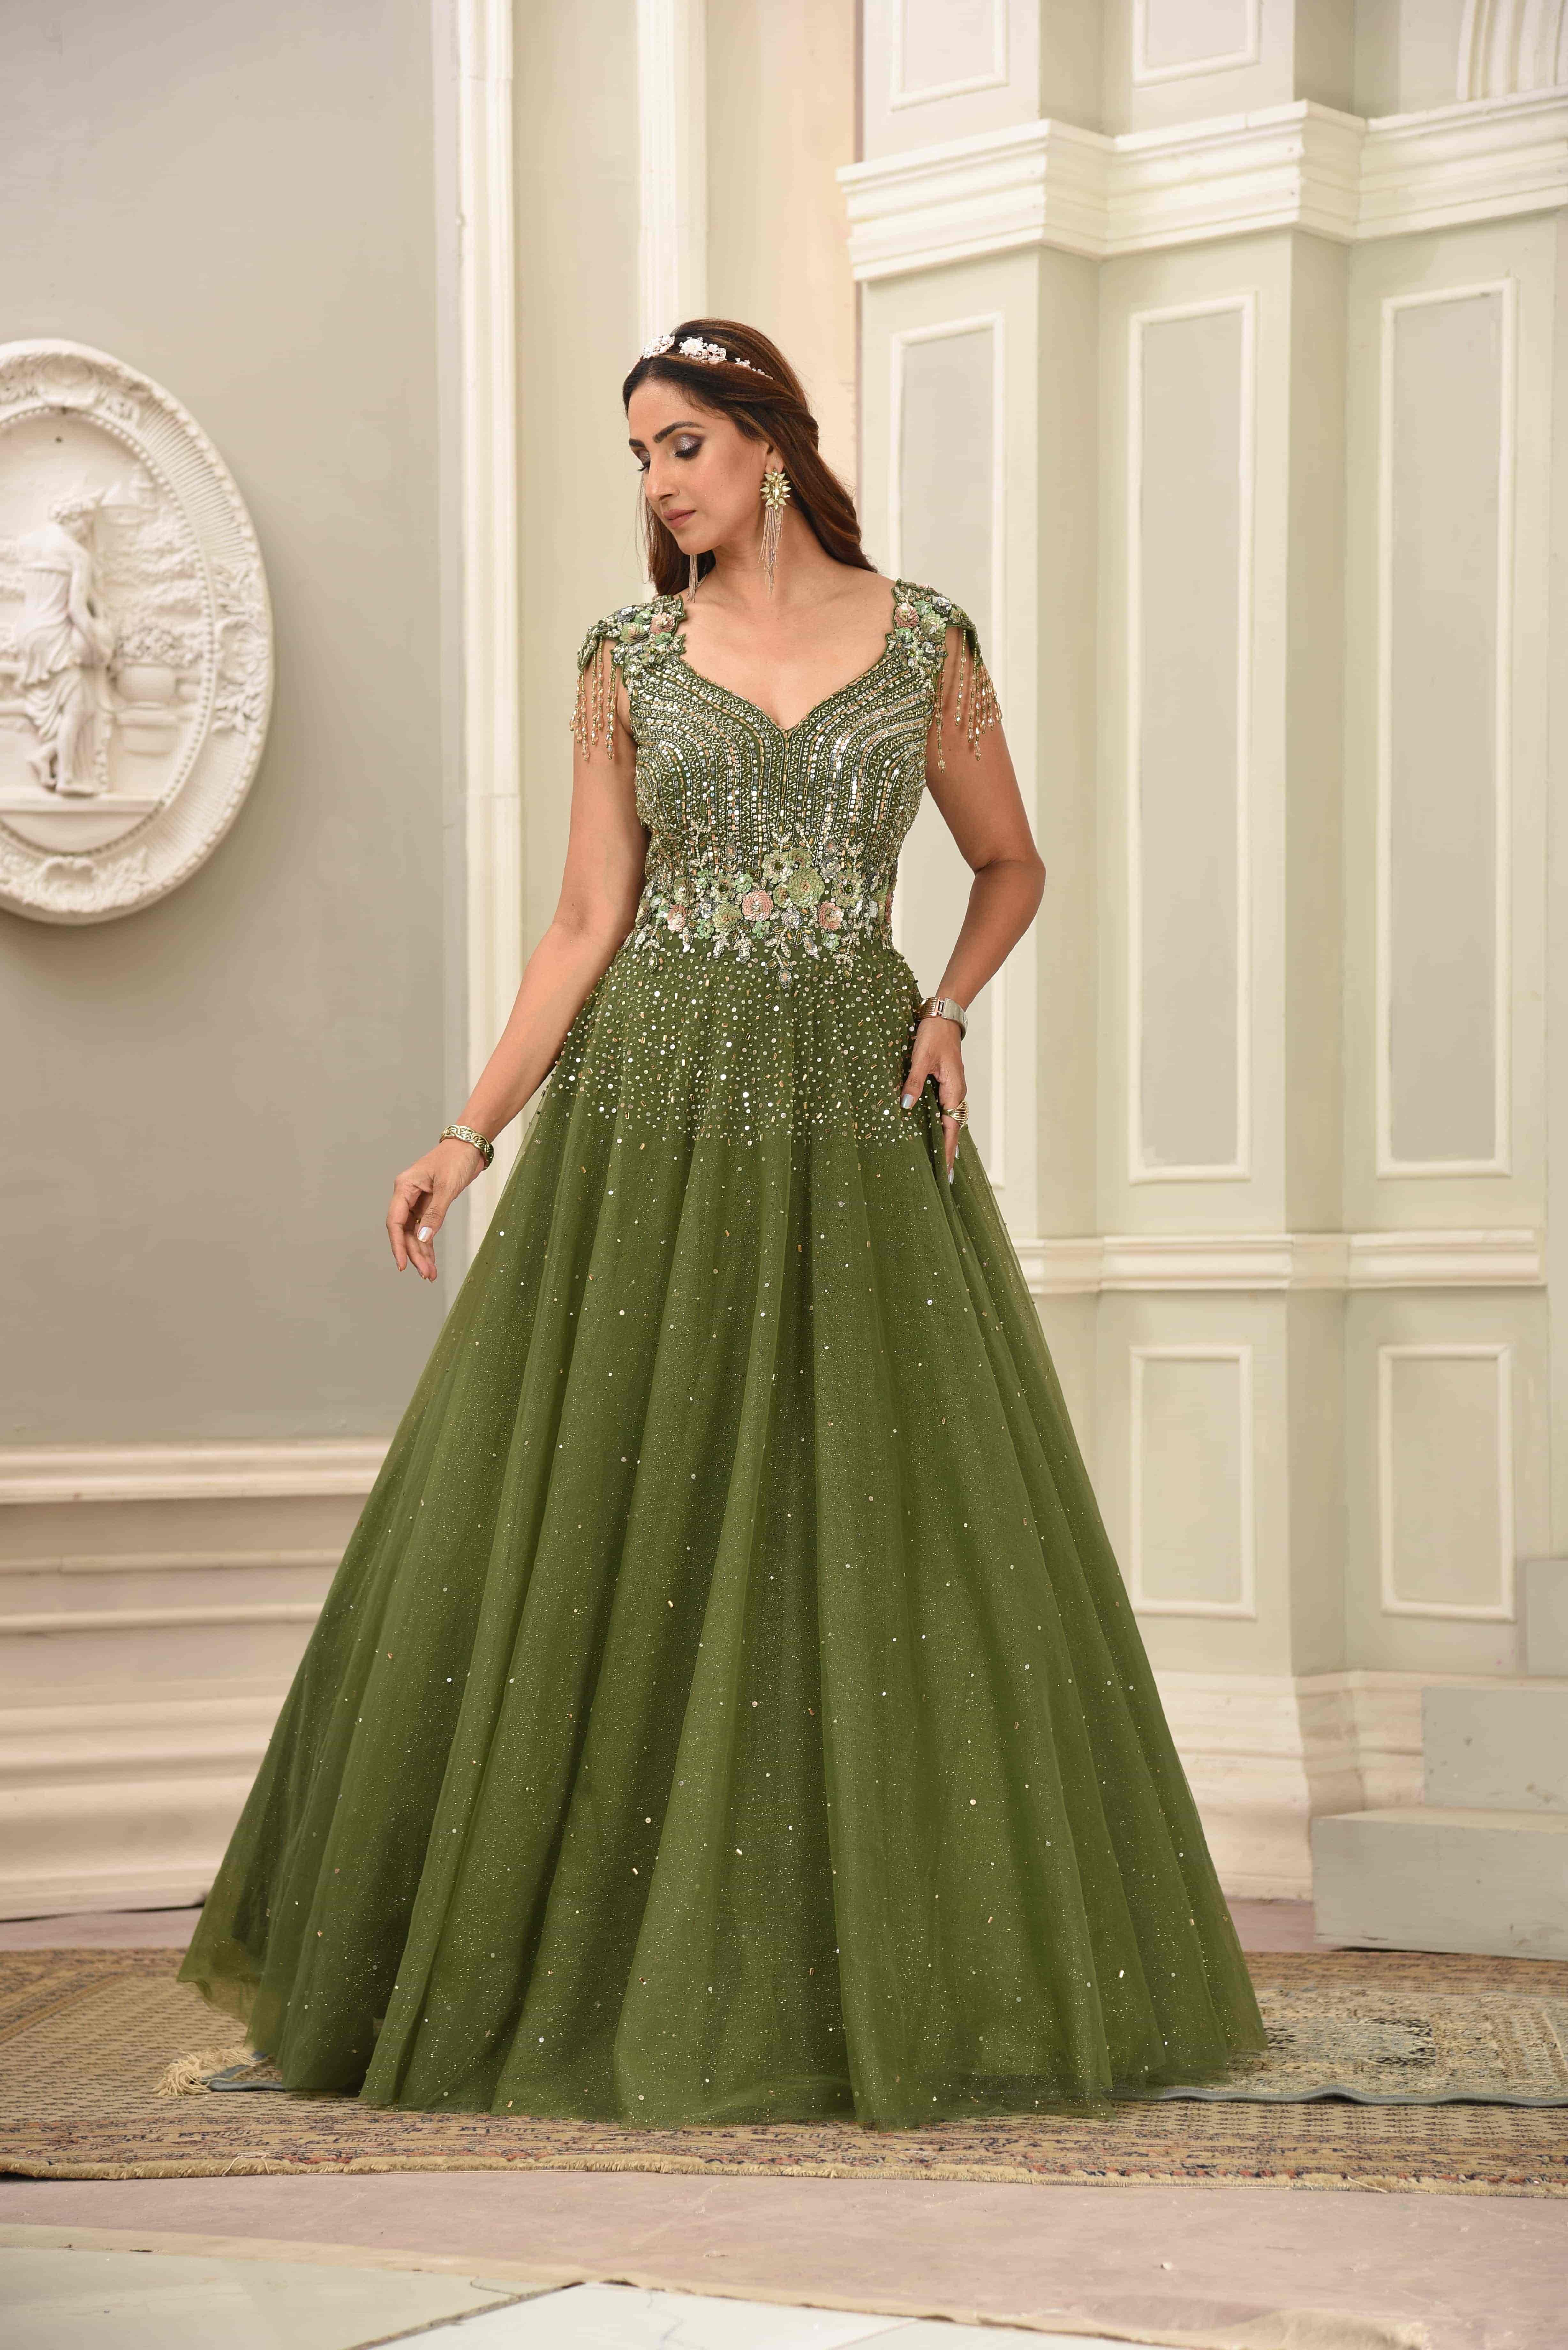 Honey Couture CAROLE Emerald Green Sequin Corset Mermaid Formal Gown D